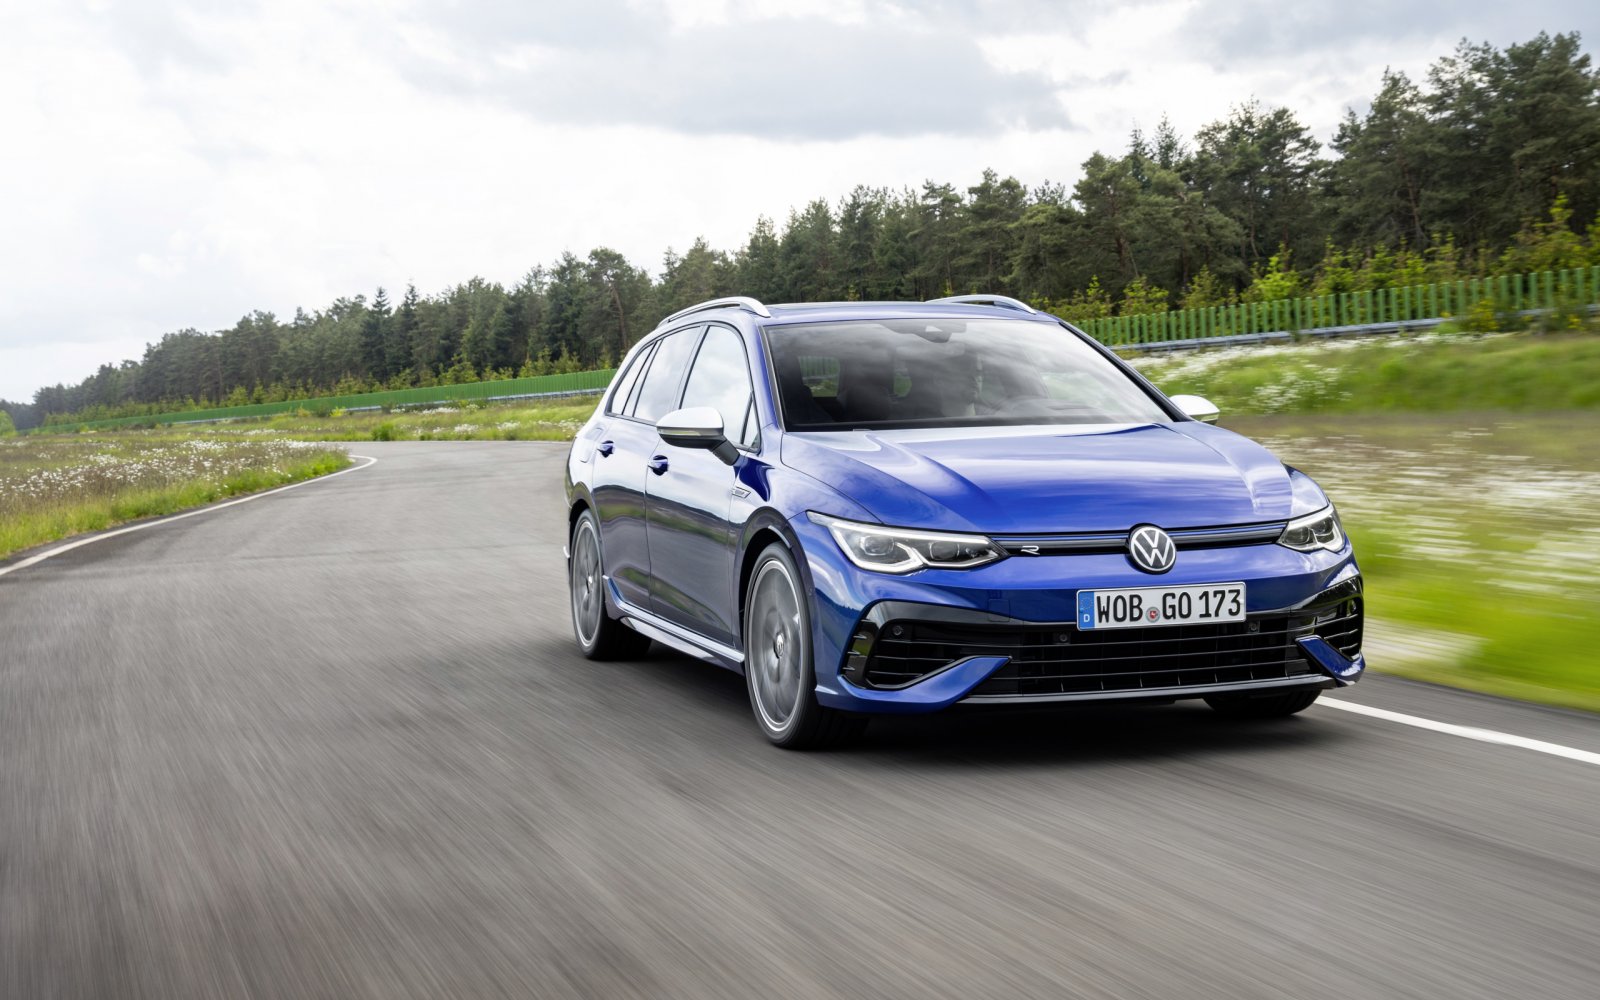 Volkswagen Golf R Variant is the fastest Volkswagen station wagon of all time